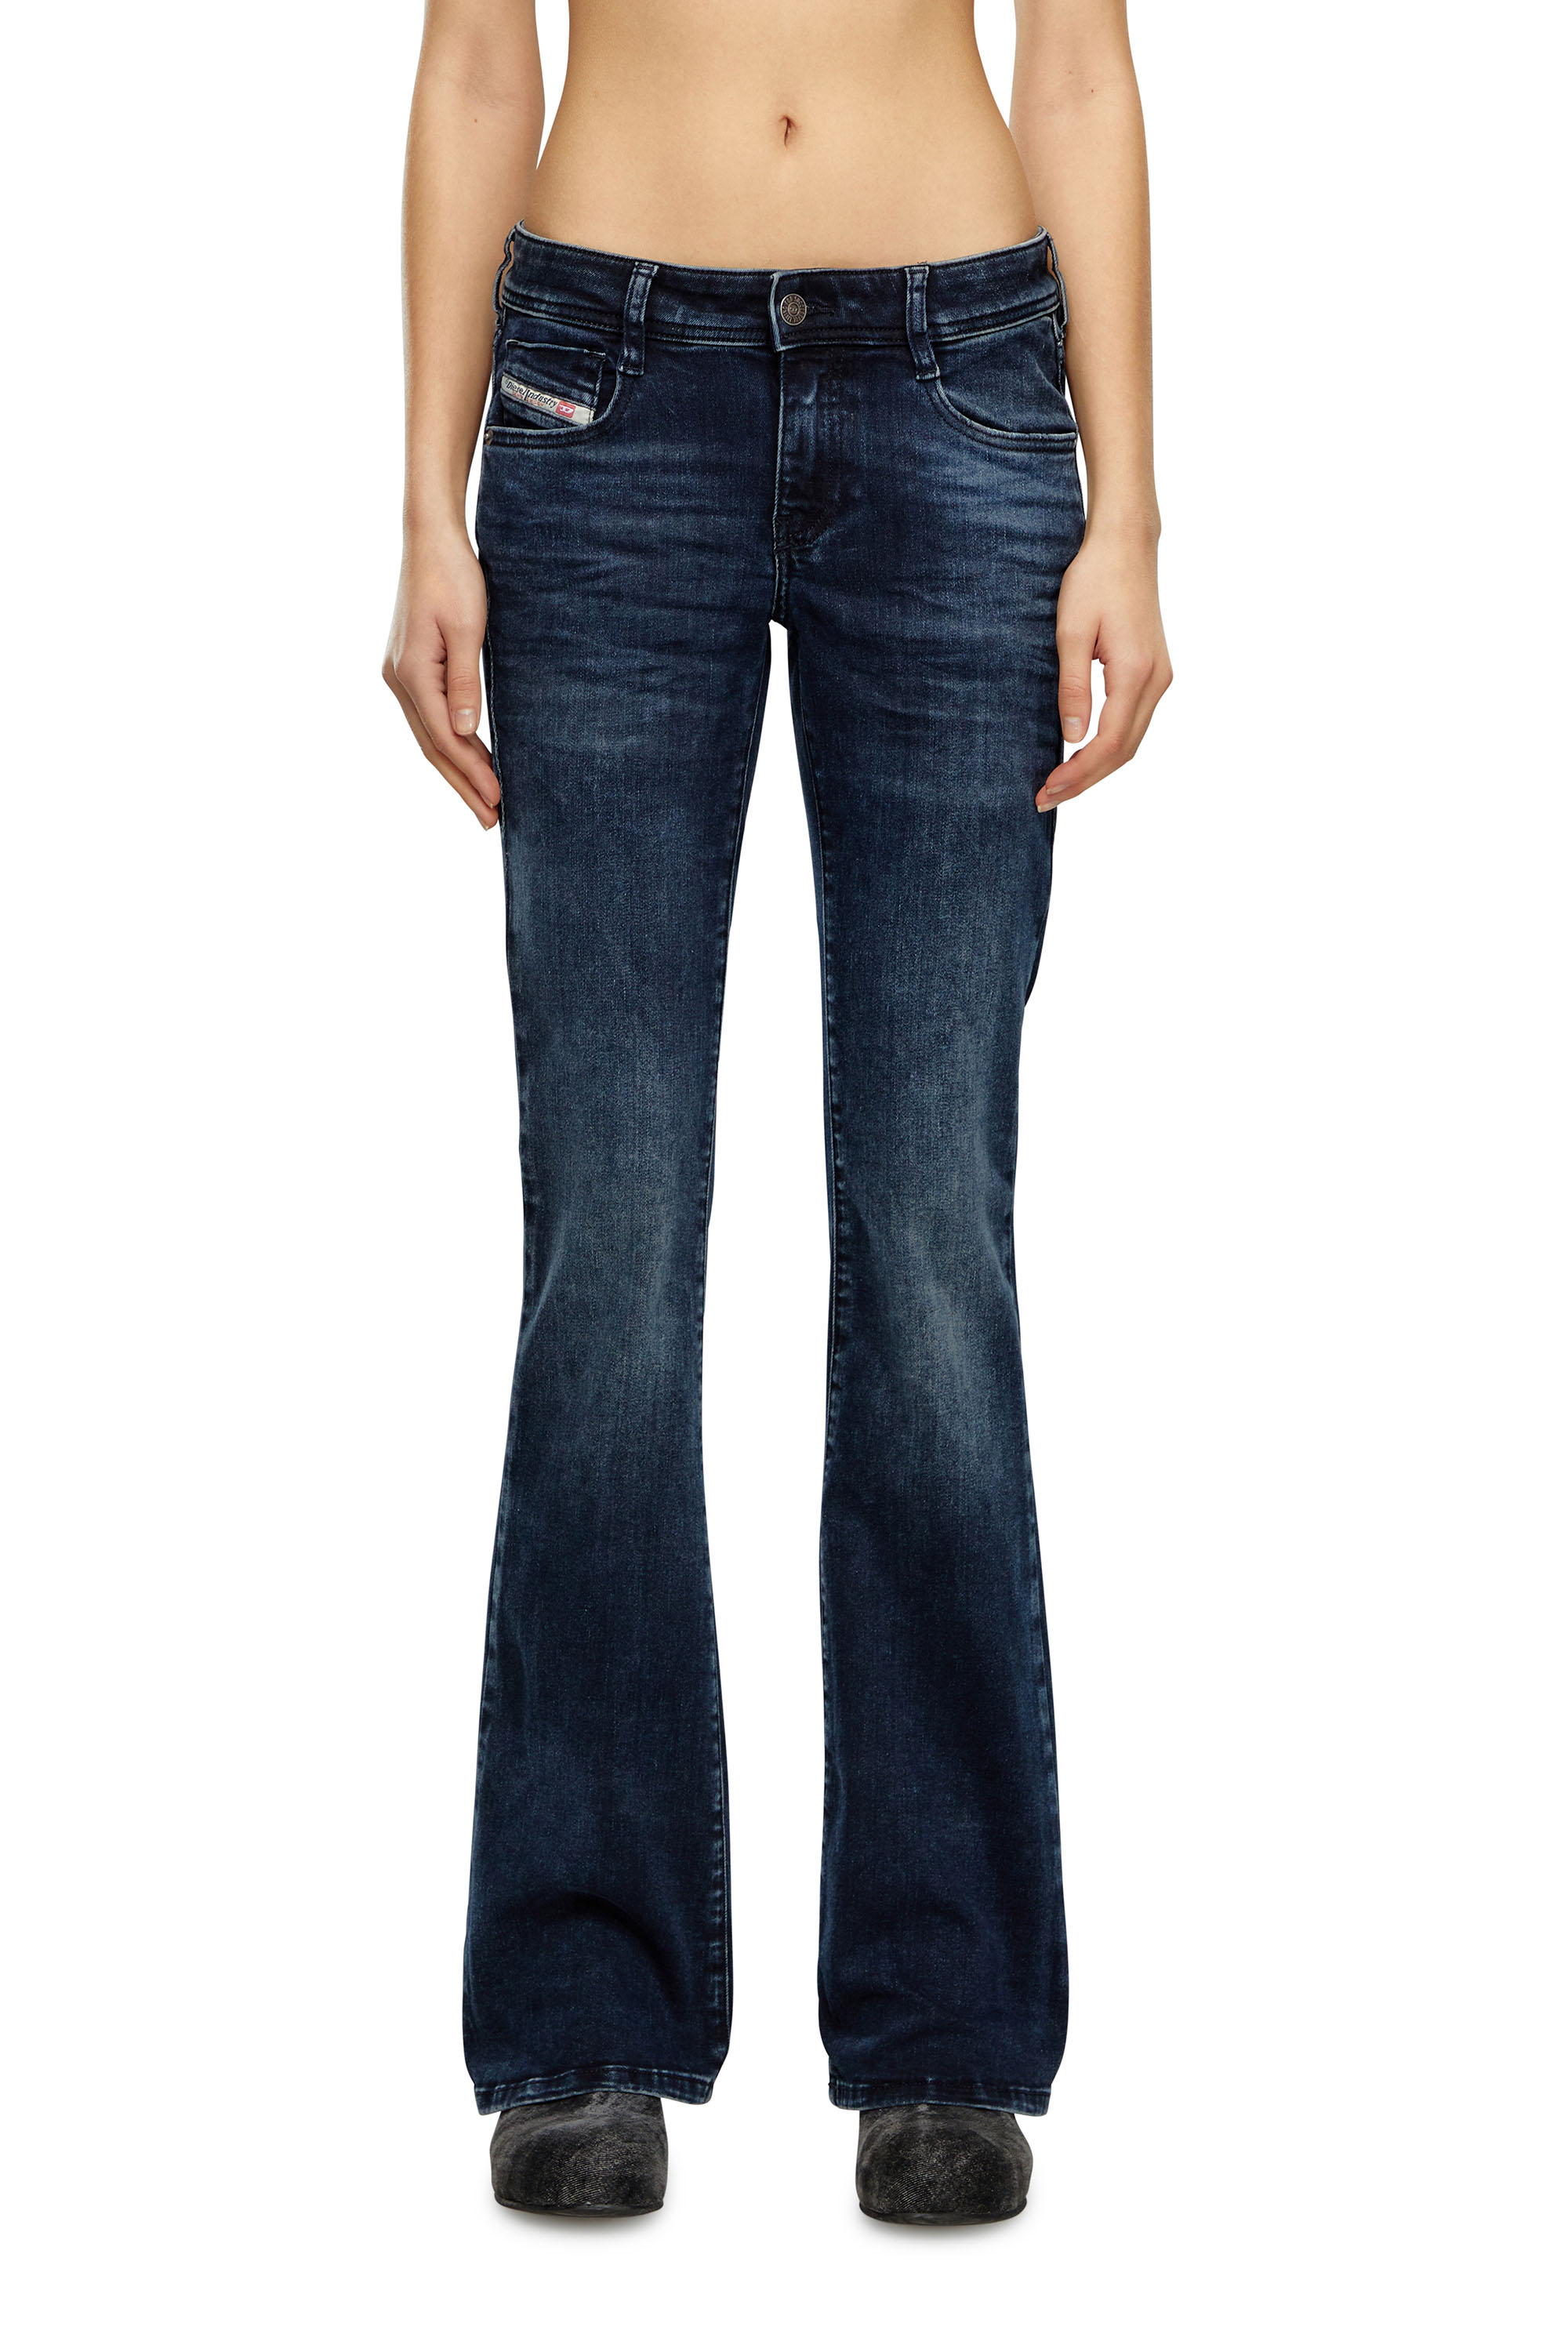 Diesel - Bootcut and Flare Jeans 1969 D-Ebbey 0ENAR, Mujer Bootcut y Flare Jeans - 1969 D-Ebbey in Azul marino - Image 2